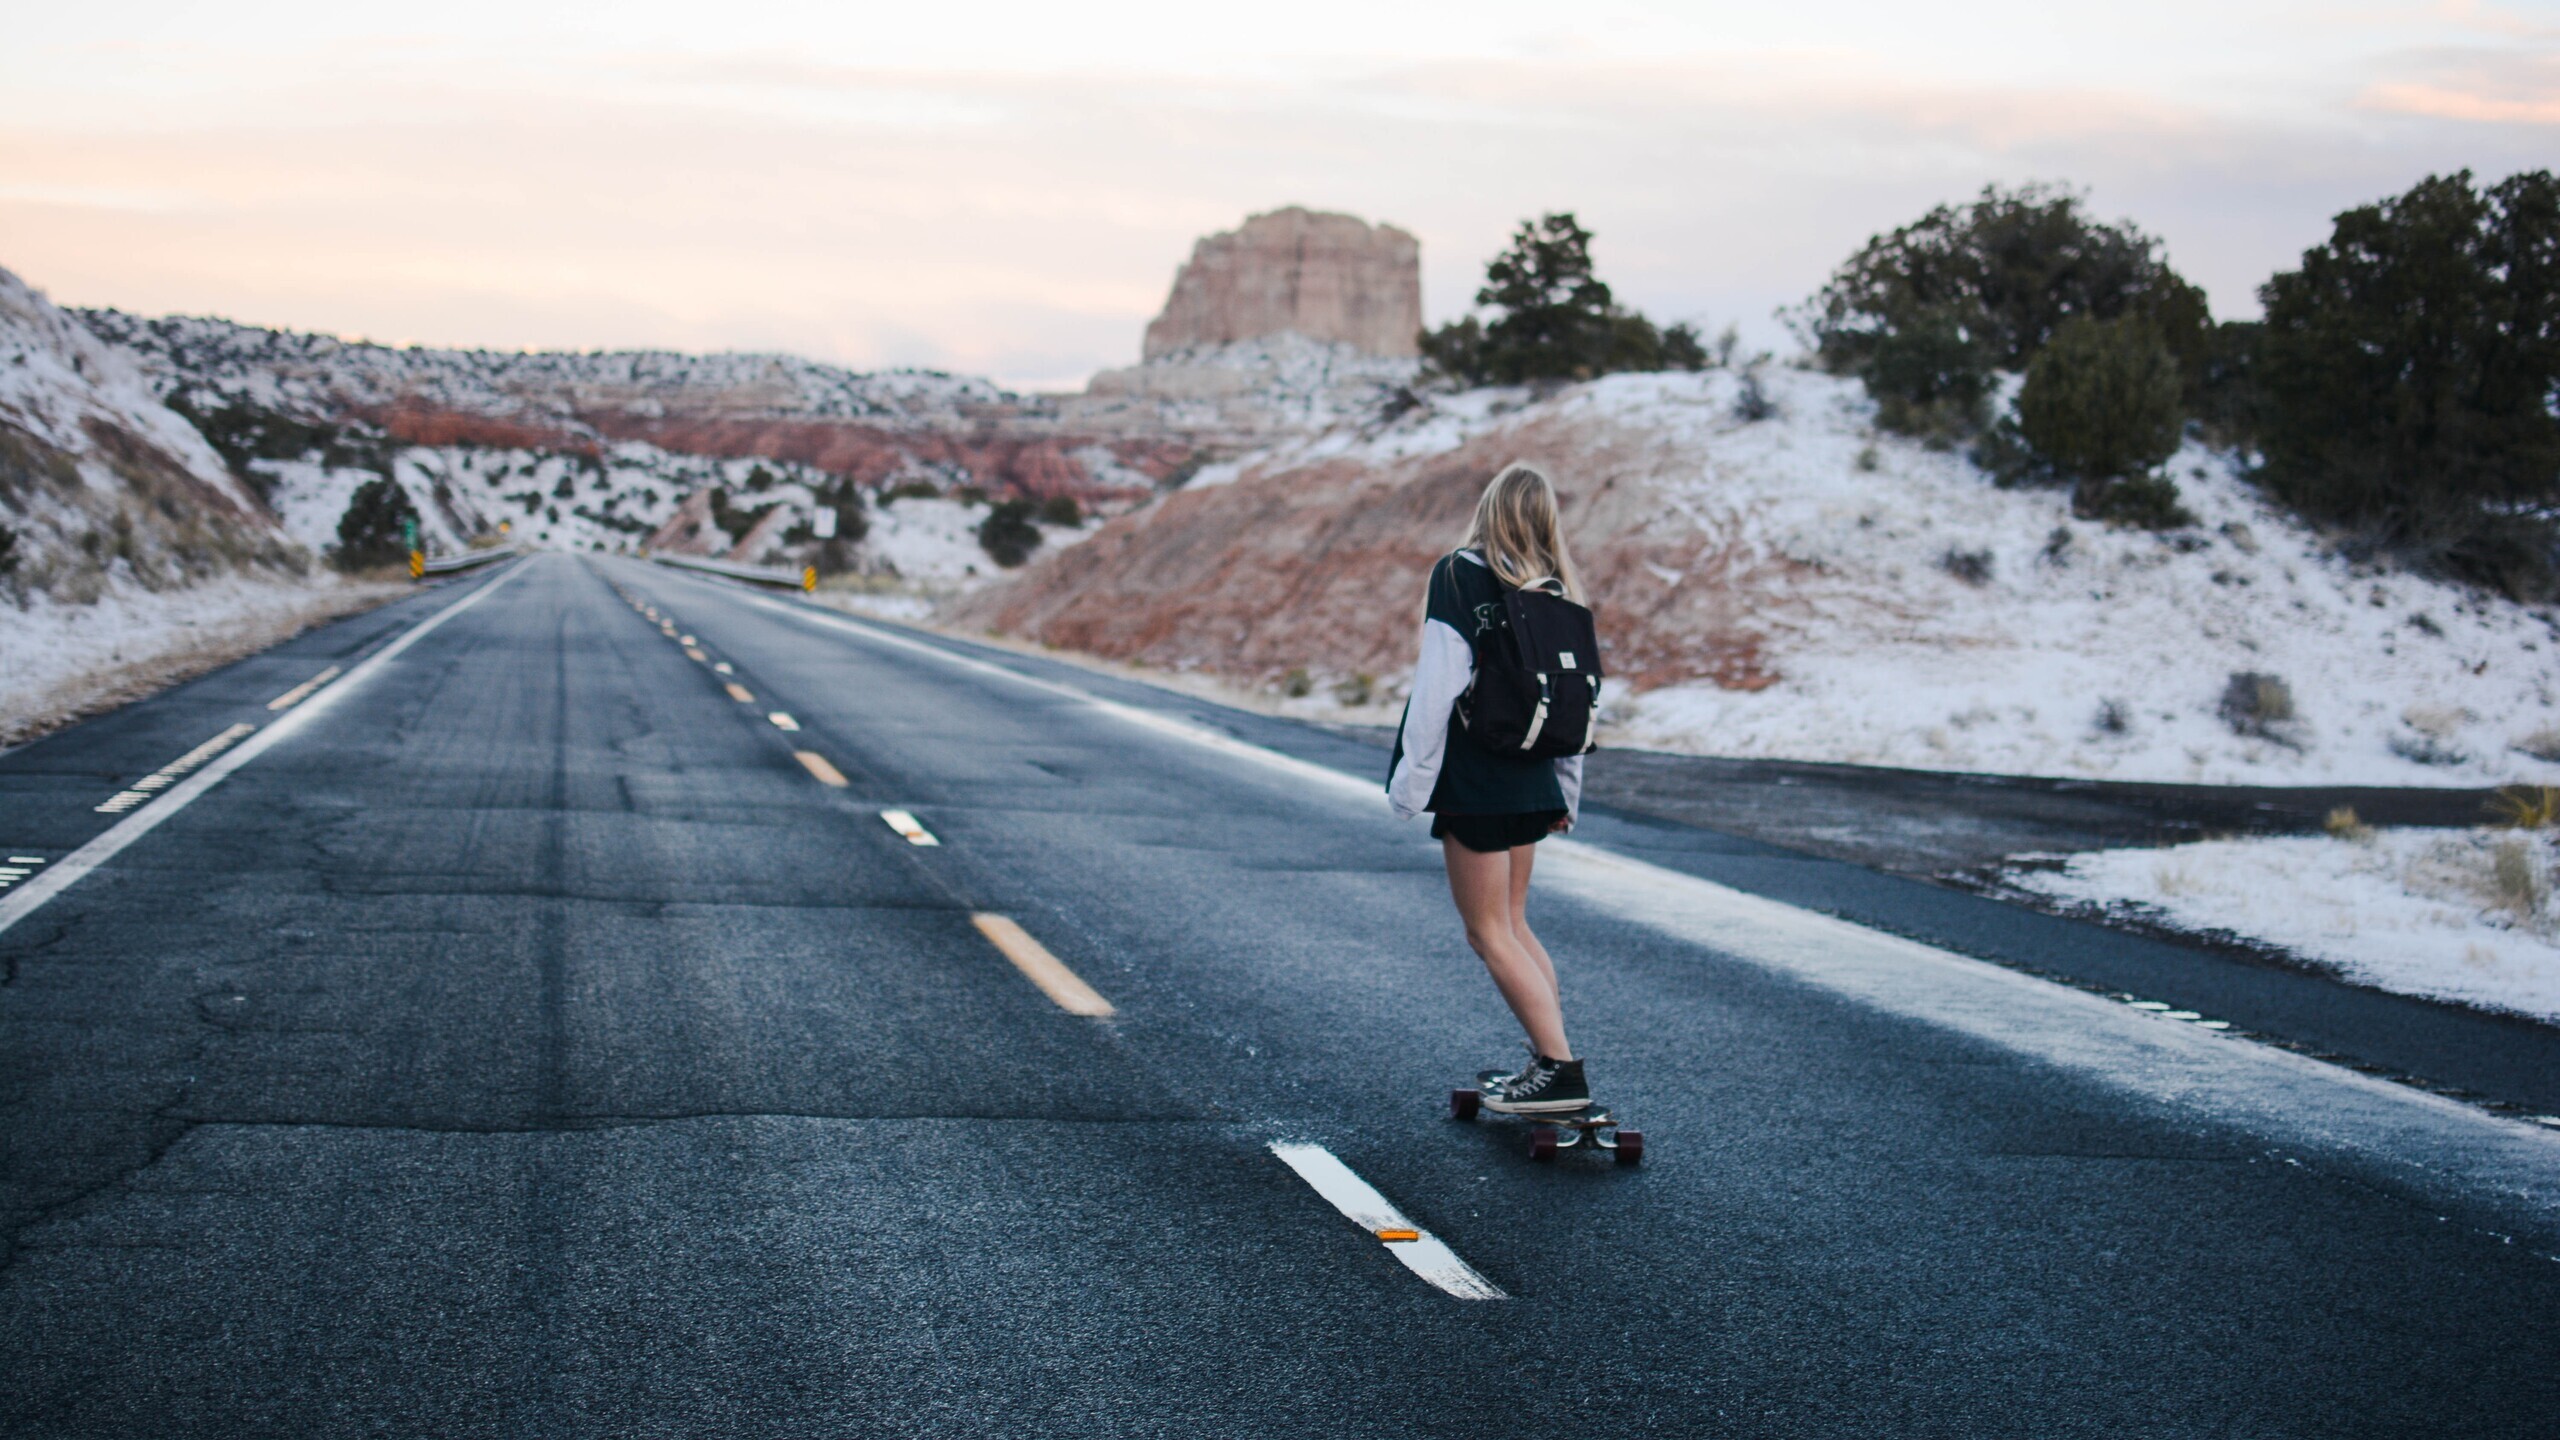 Girl Skateboarding: Using a skateboard as a means of transportation, Commuting on skateboards, cruiser boards, and longboards. 2560x1440 HD Background.